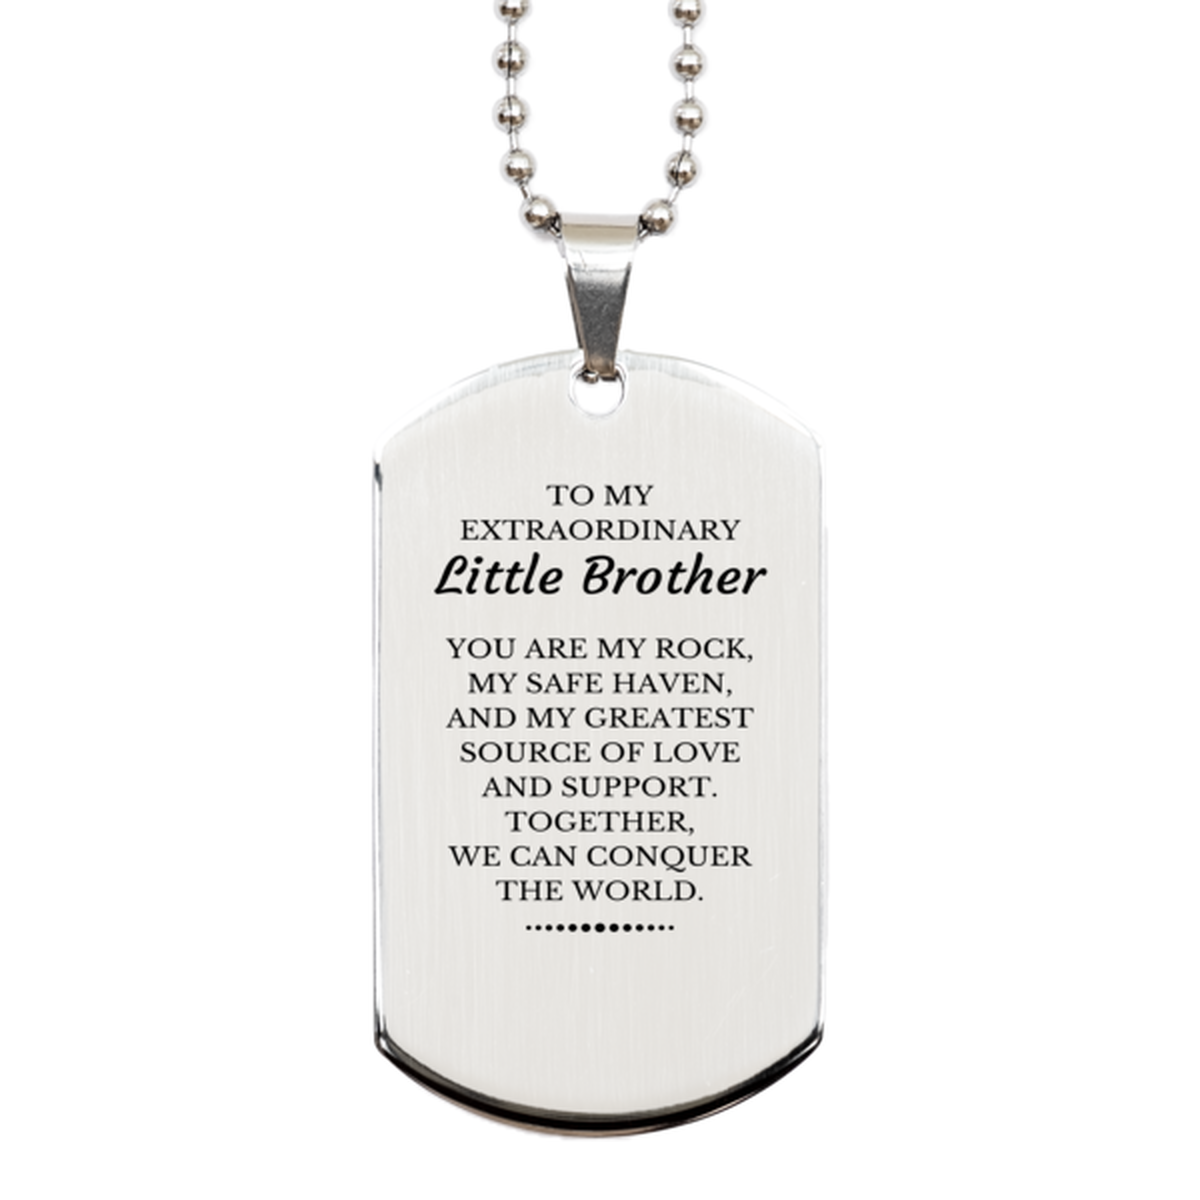 To My Extraordinary Little Brother Gifts, Together, we can conquer the world, Birthday Silver Dog Tag For Little Brother, Christmas Gifts For Little Brother